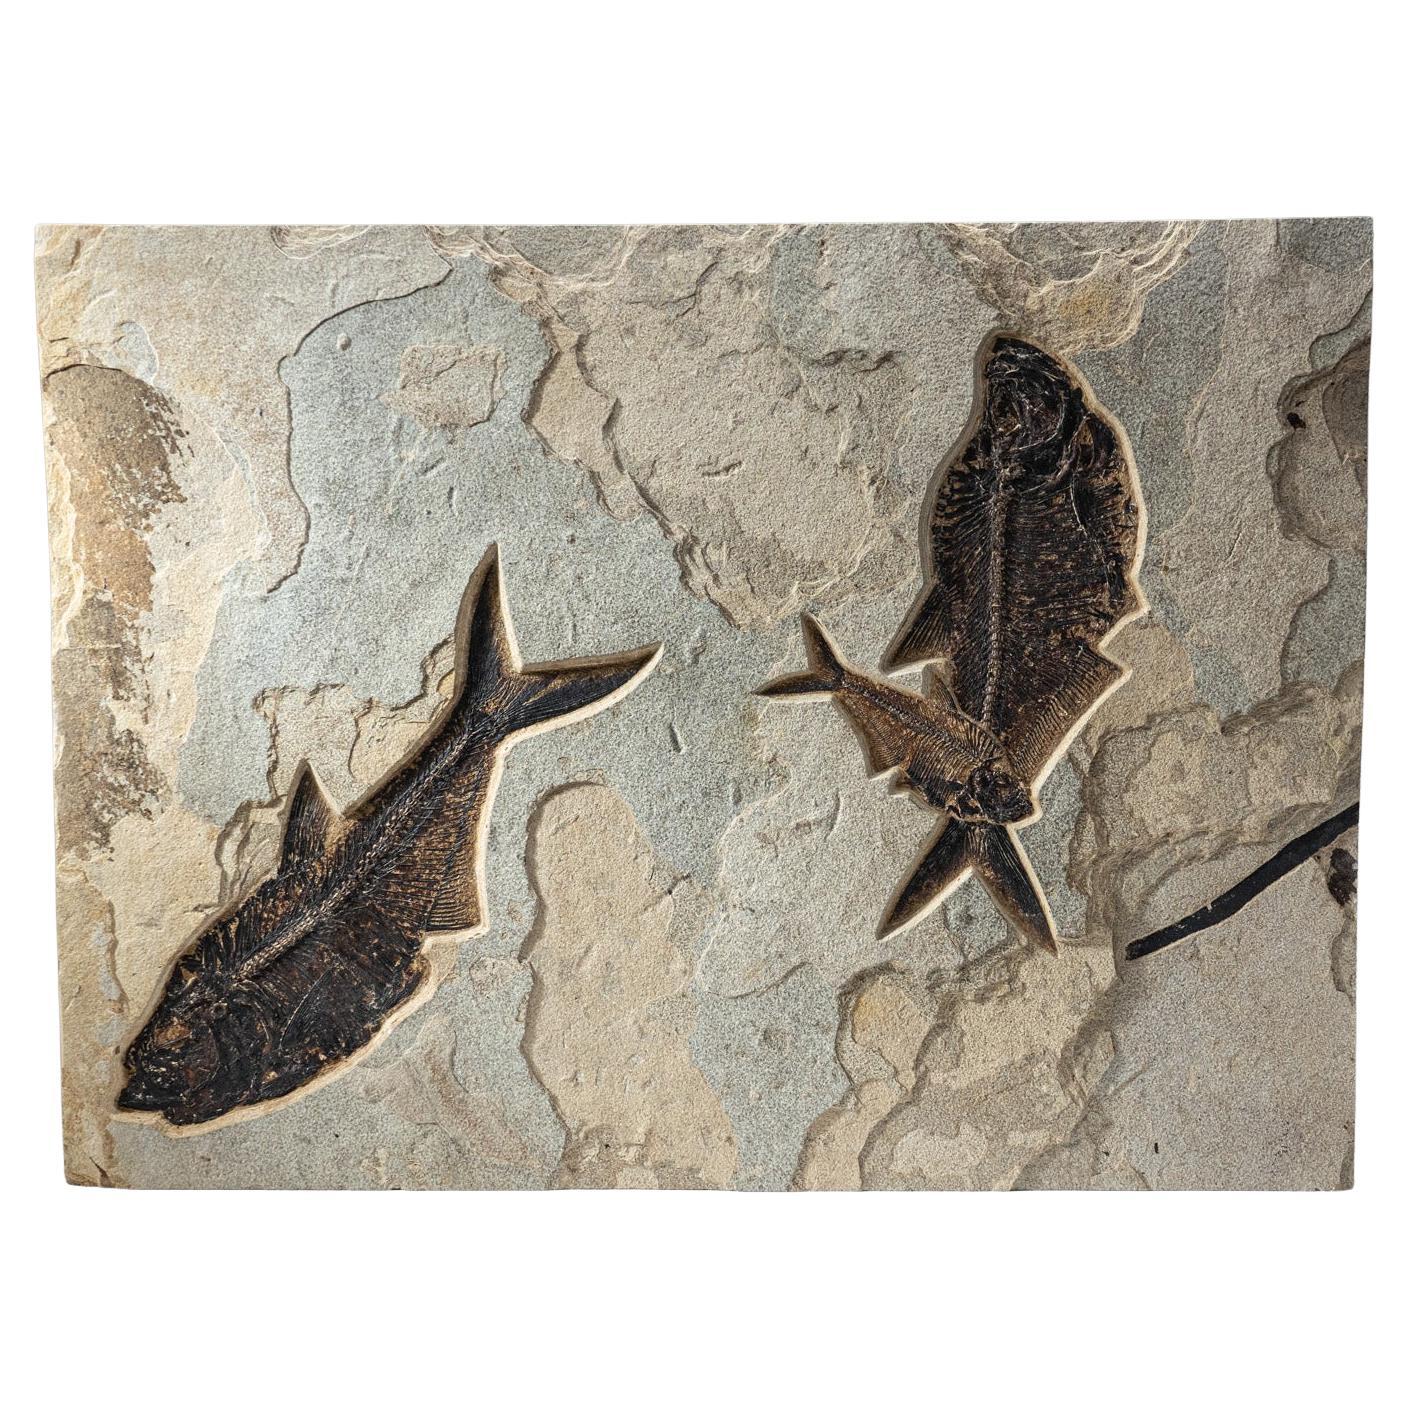 Natural Giant Diplomytus Fish Fossil Plate (60.2 lbs) For Sale